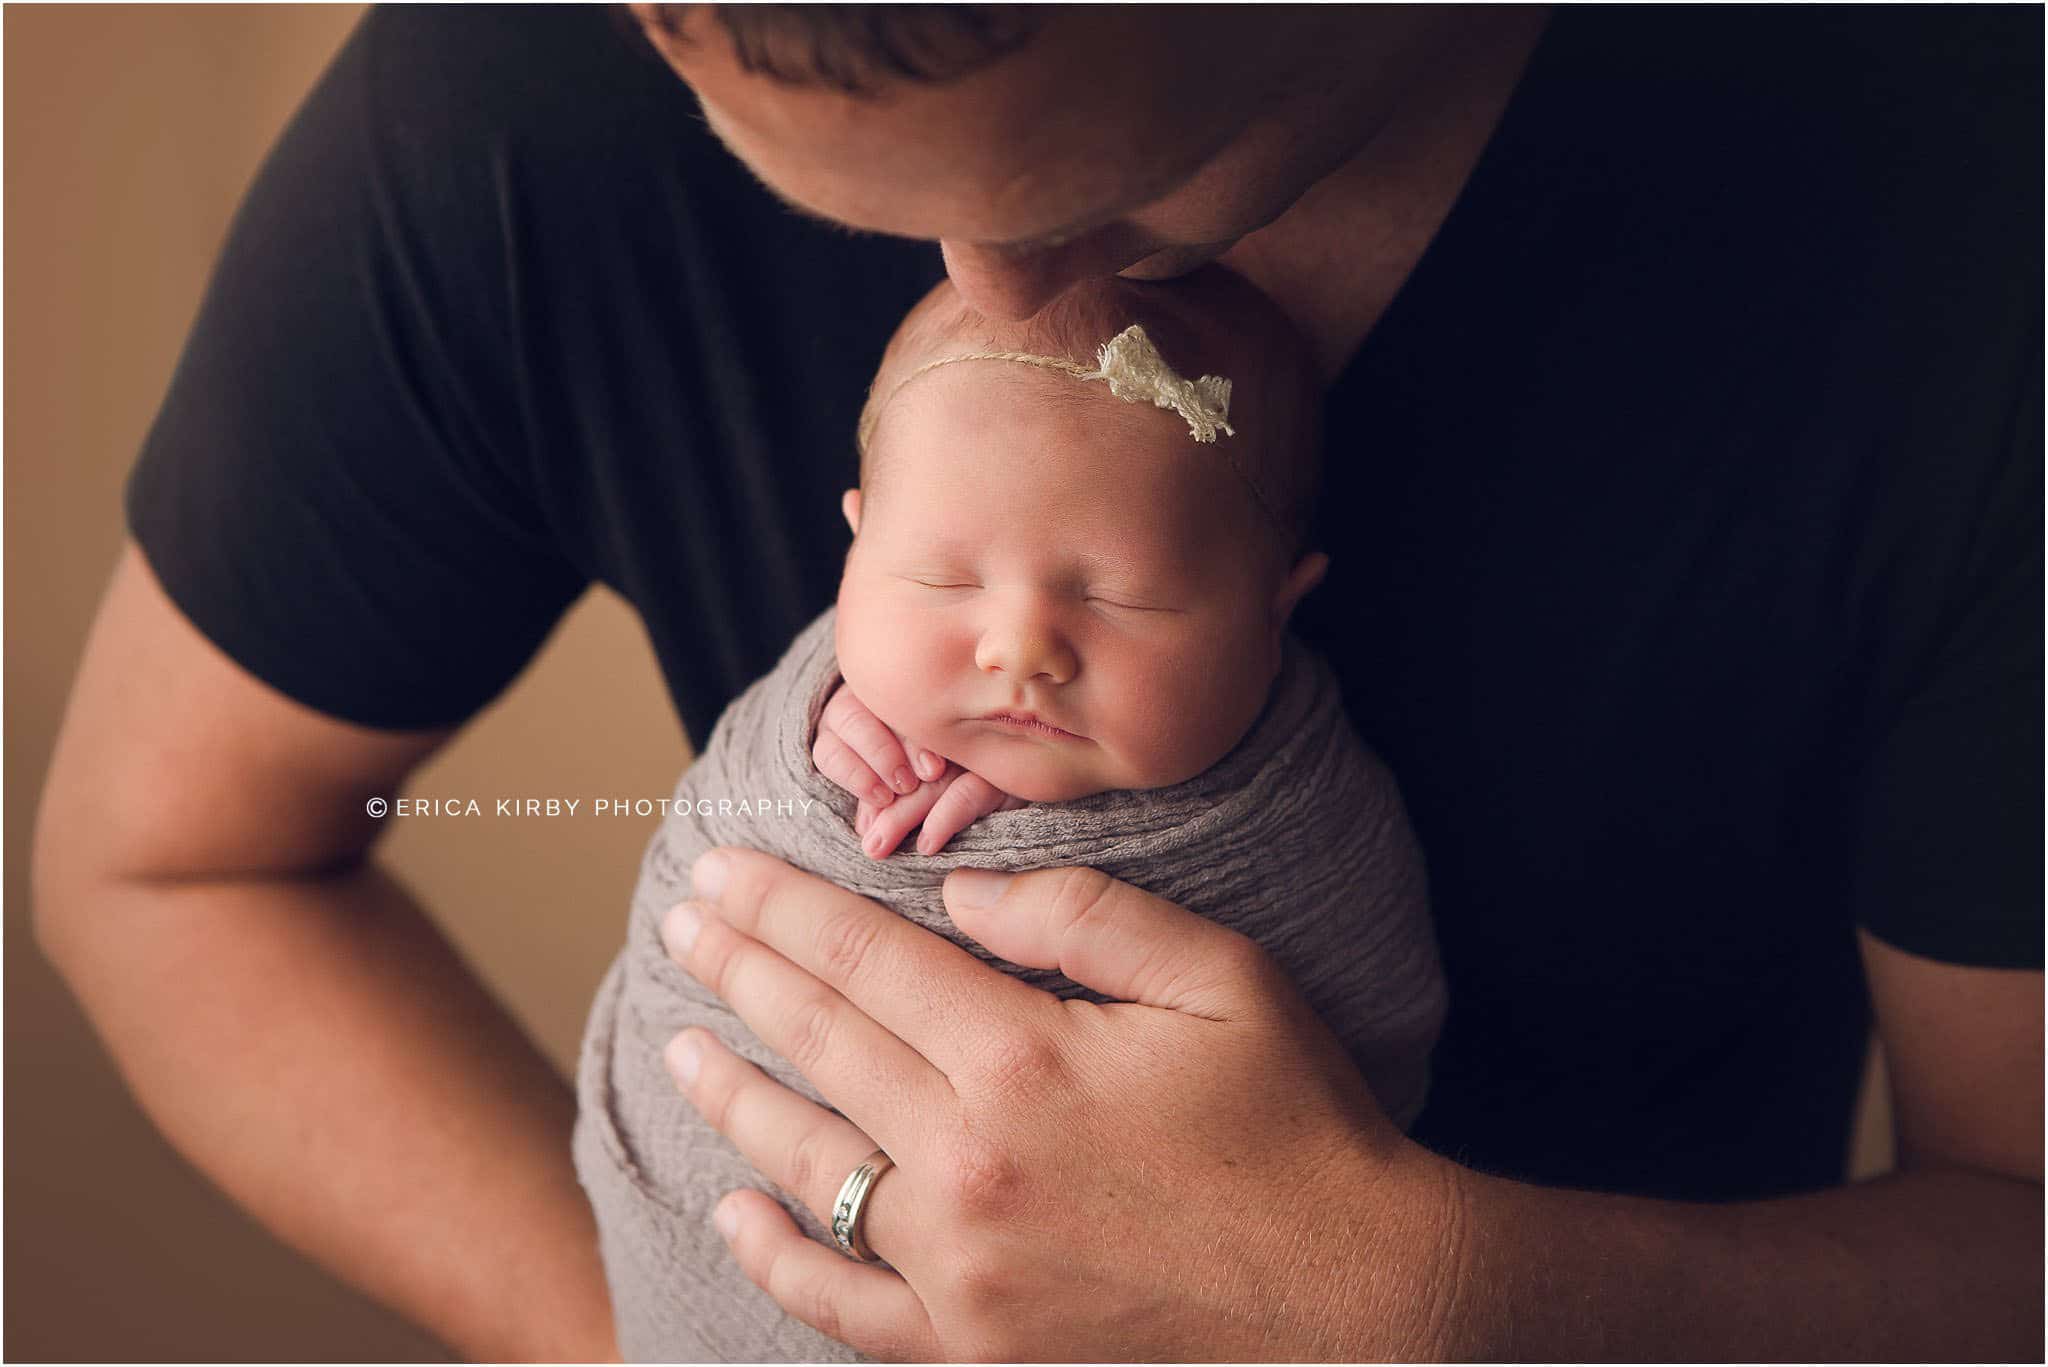 Newborn Photography Bentonville AR | Baby girl newborn session with lots of color, sleeping baby in adorable poses | Erica Kirby Photography